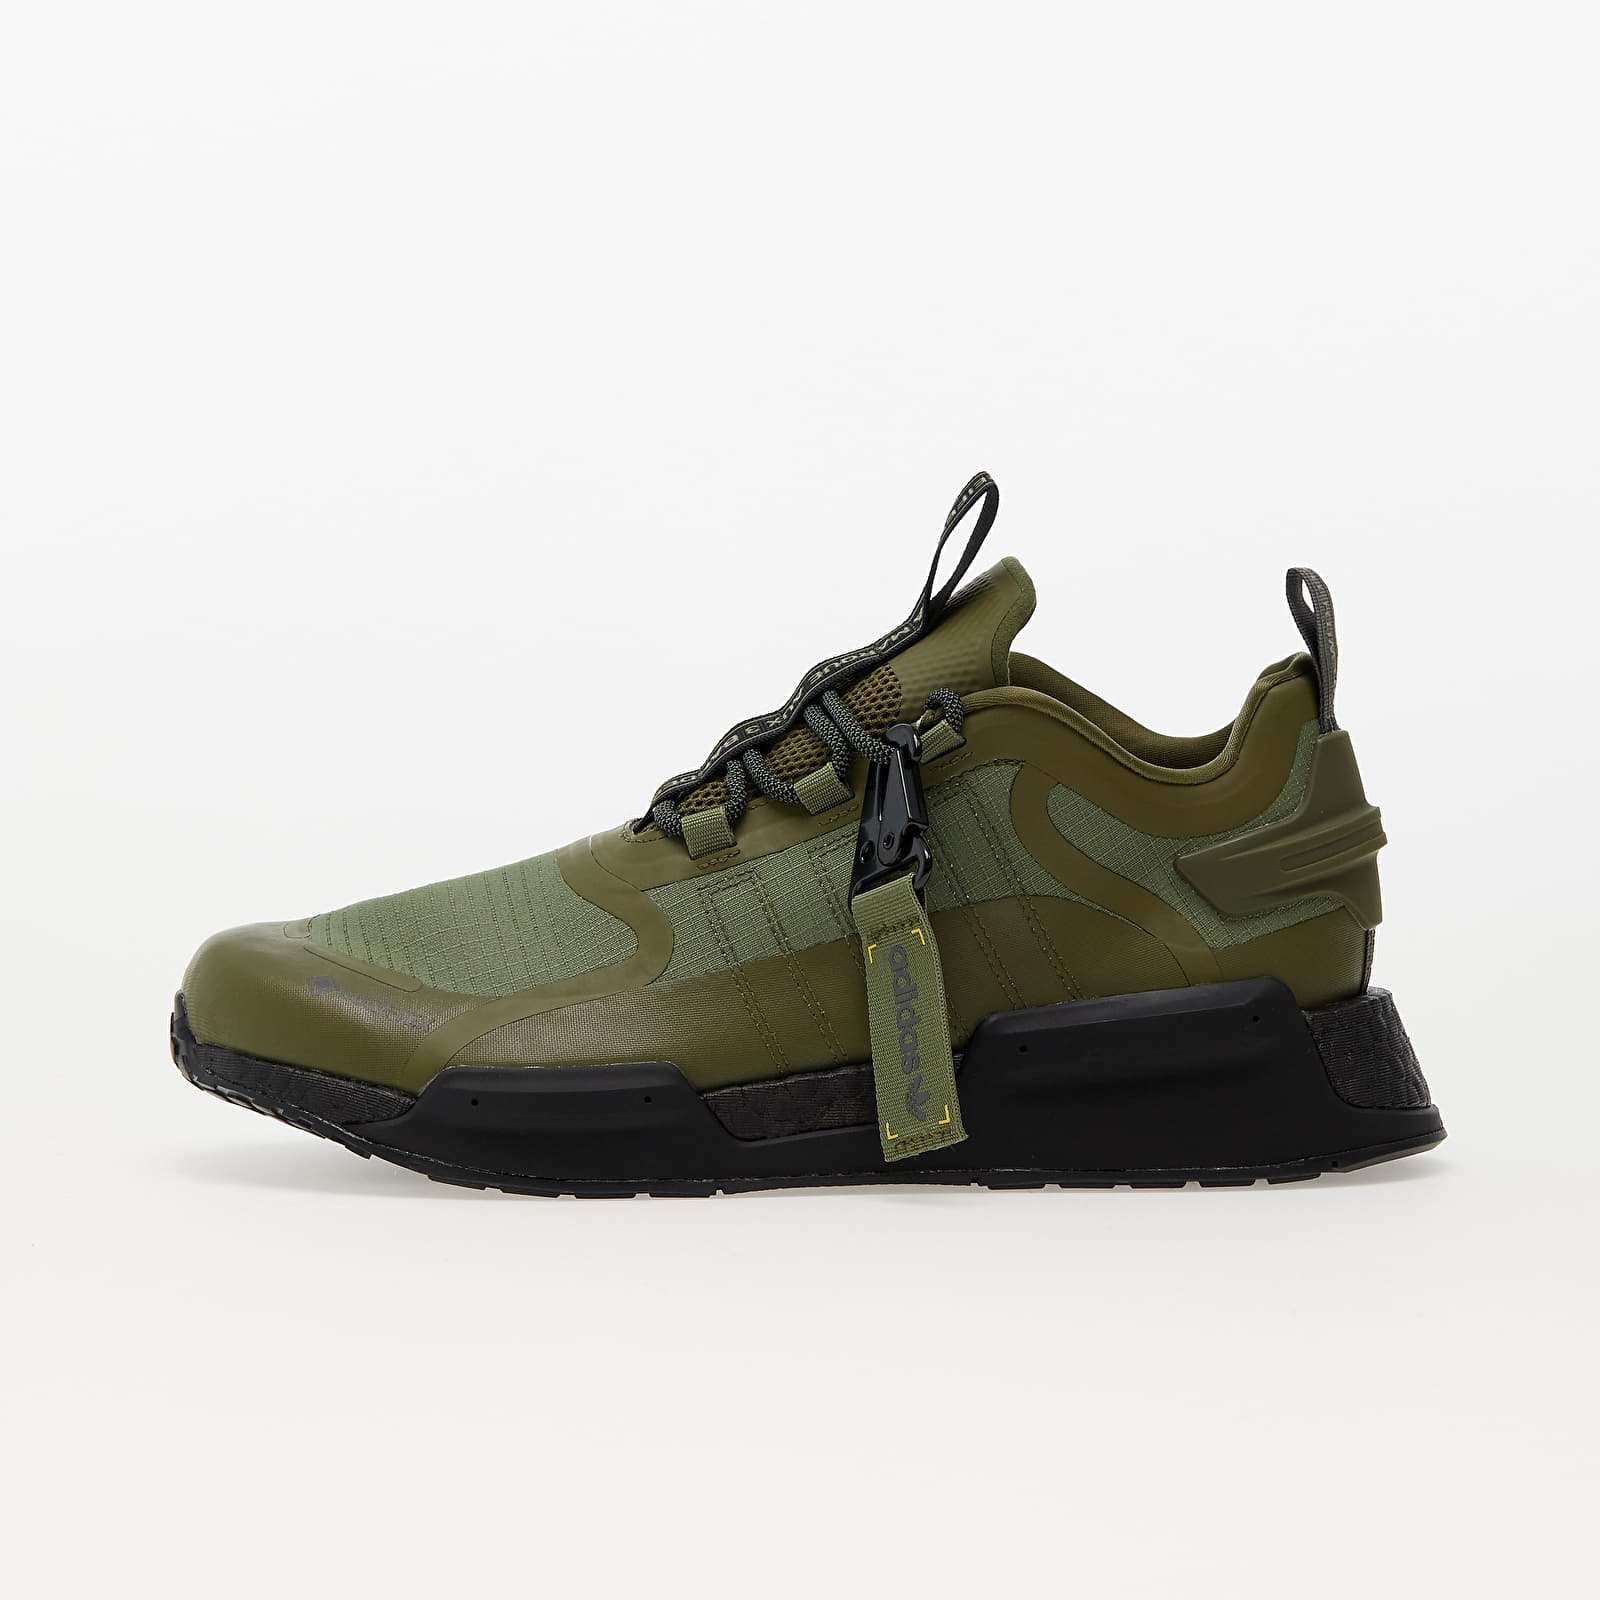 Men's shoes adidas NMD_V3 GTX Focus Olive/ Impossible Yellow/ Core Black